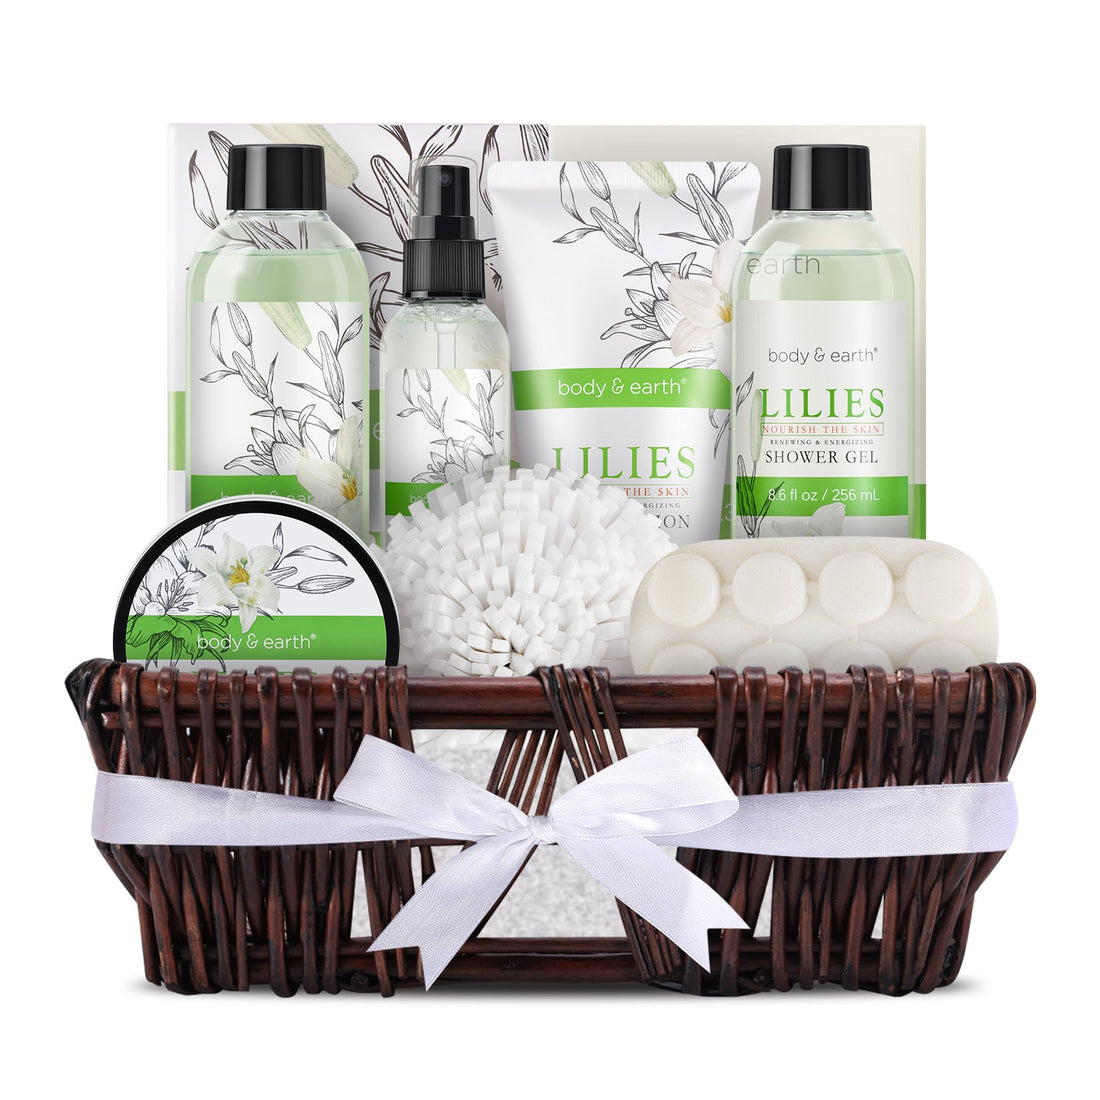 Body & Earth Gift Basket, Lily